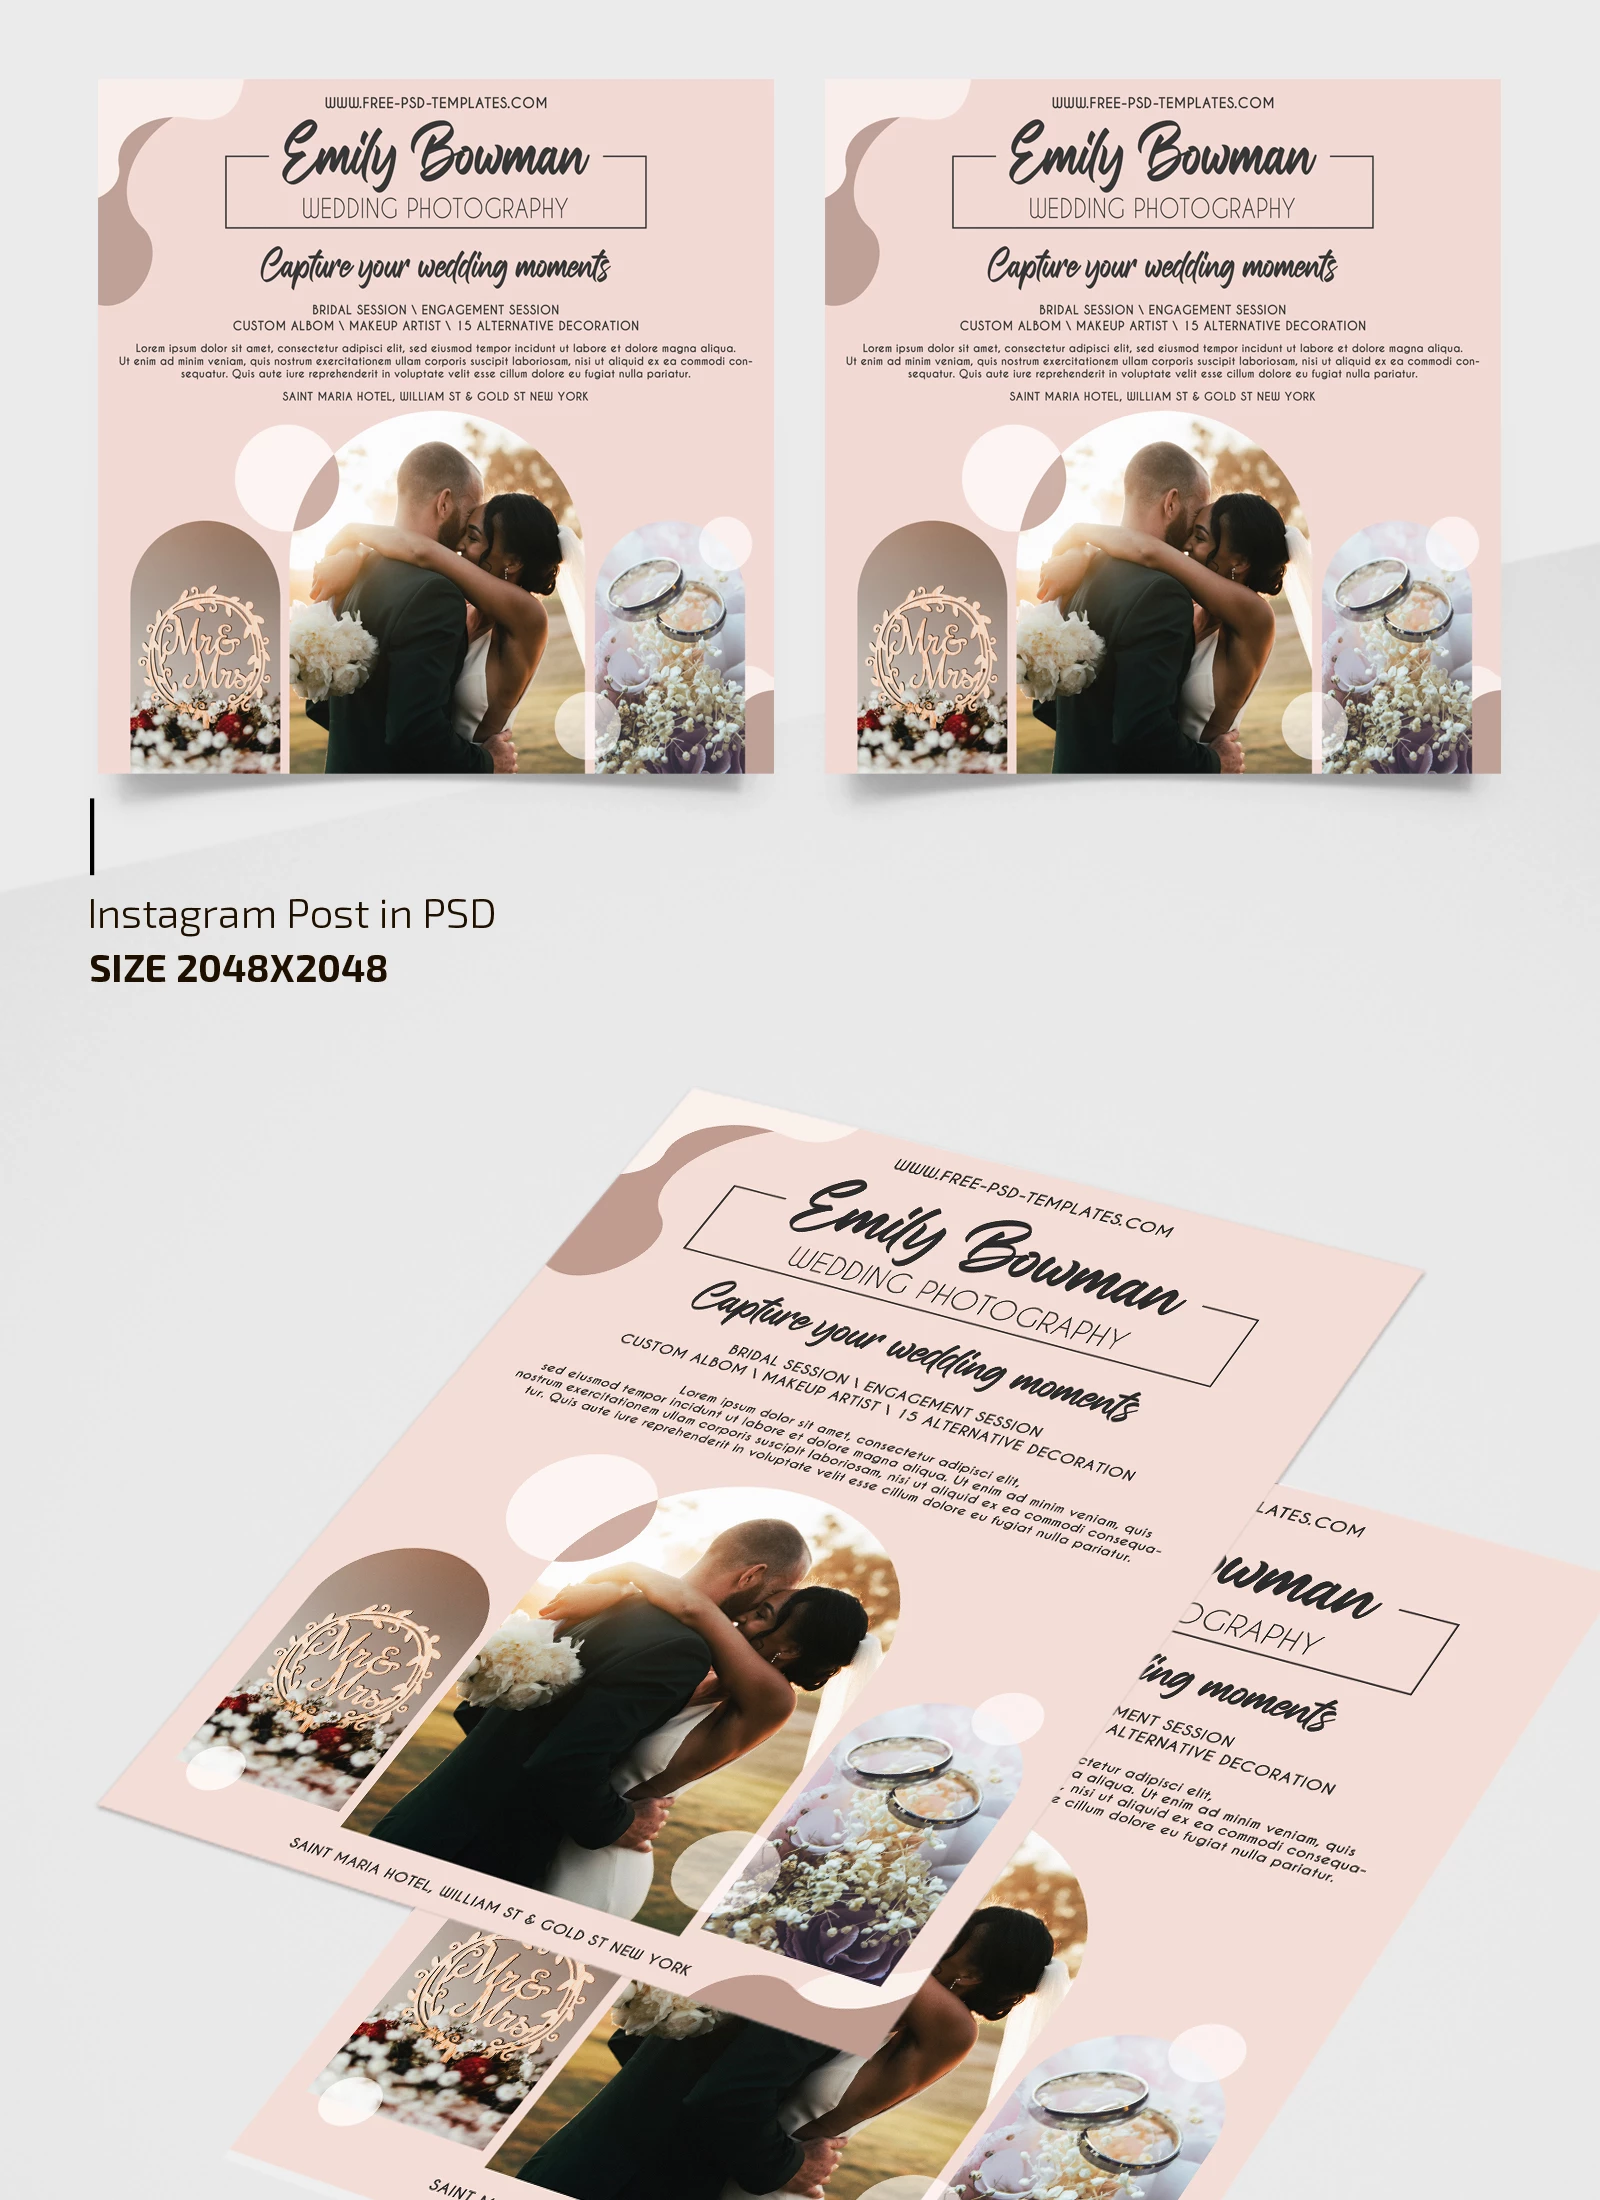 Free Wedding Photography Flyer Template + Instagram Post (PSD)